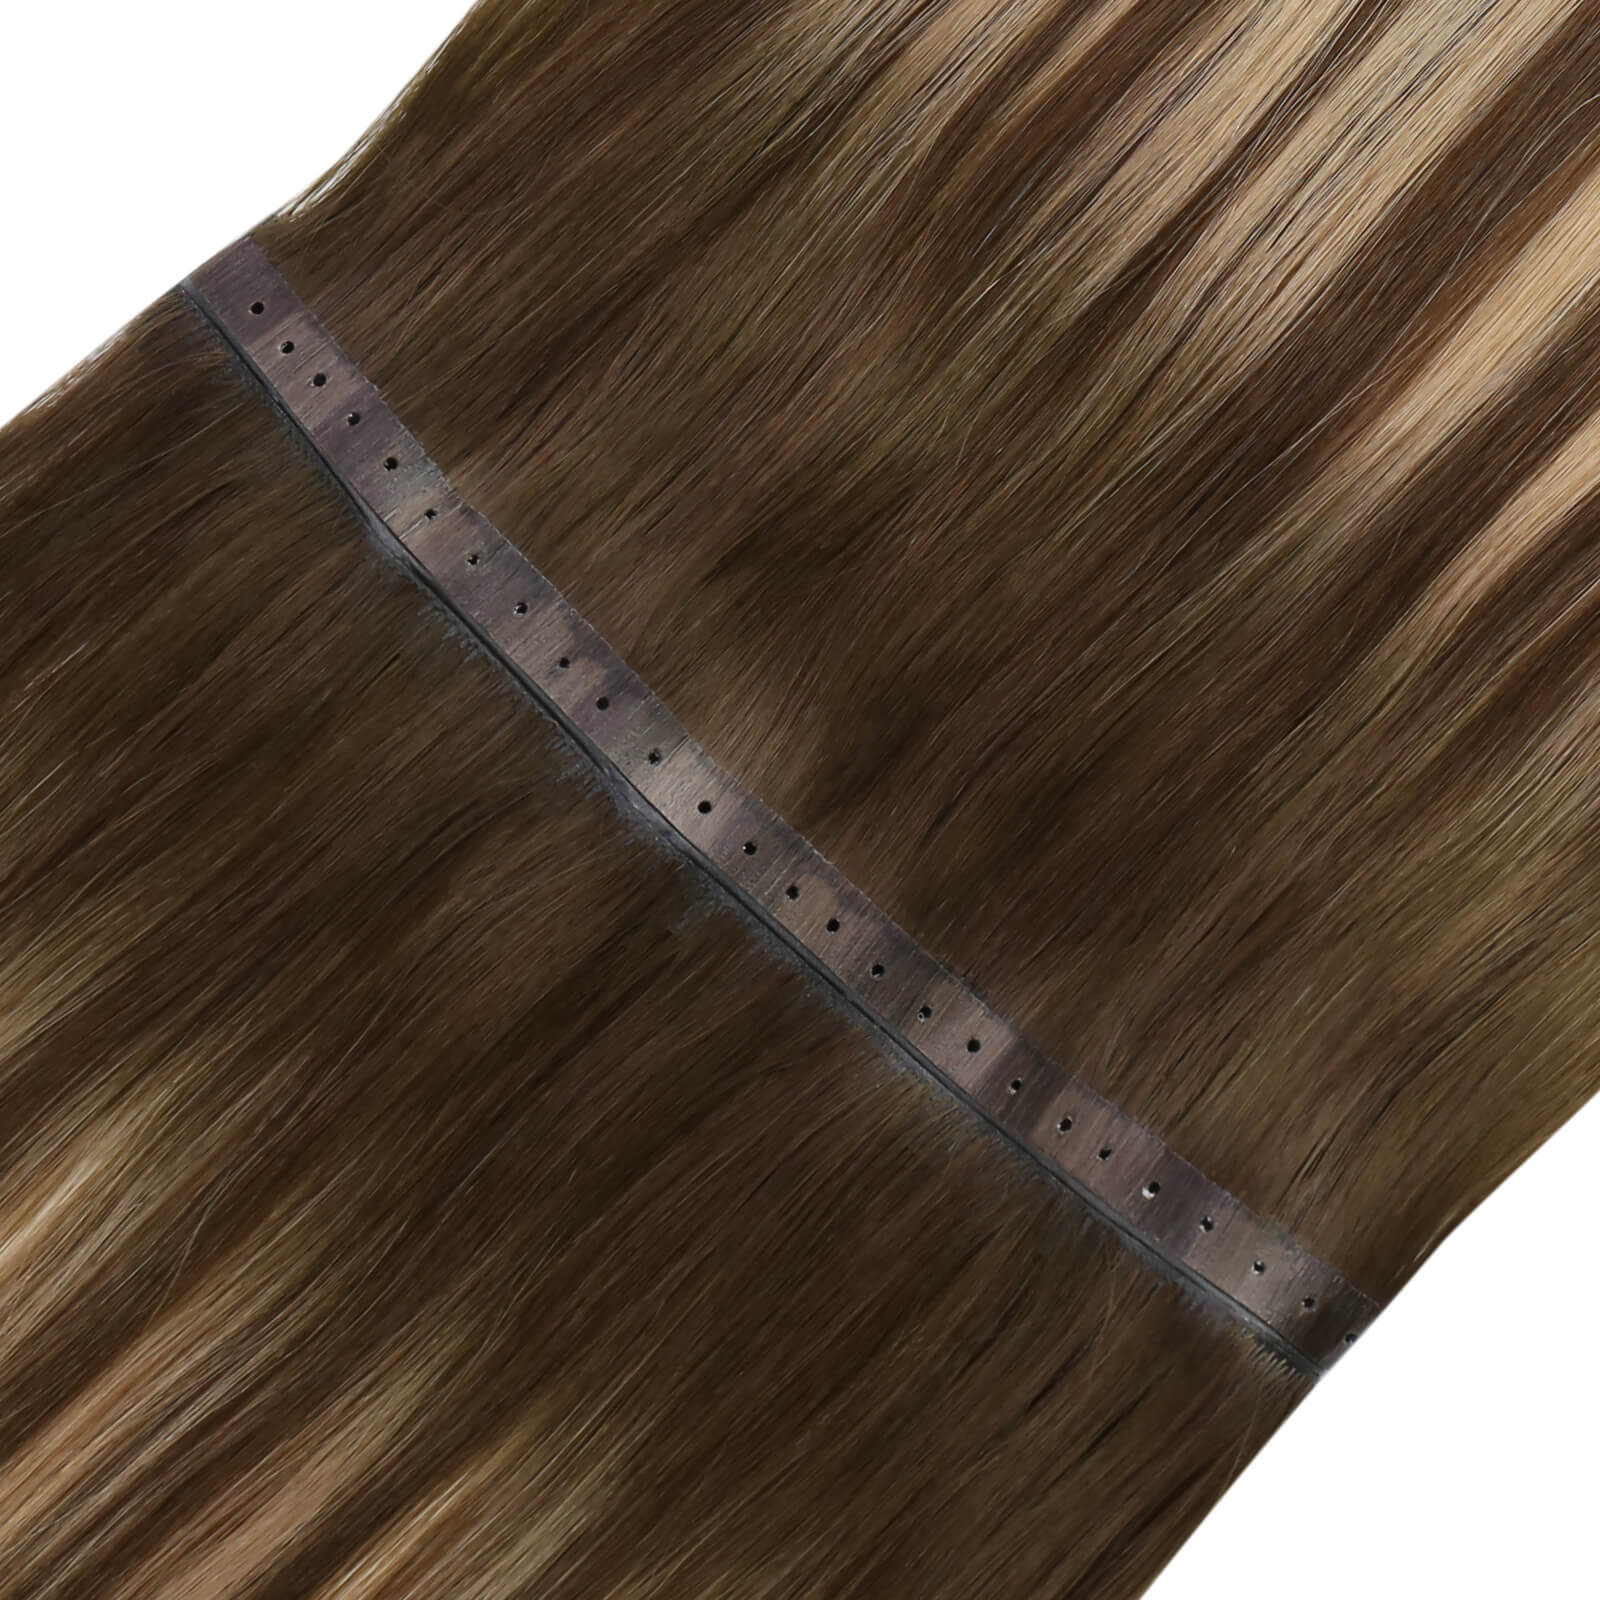 weft hair extensions,sew in weft hair extensions,balayage brown hair extensions,XO Invisible weft,XO hair extensions,xo invisible weft extensions,pu wefts hair extensions